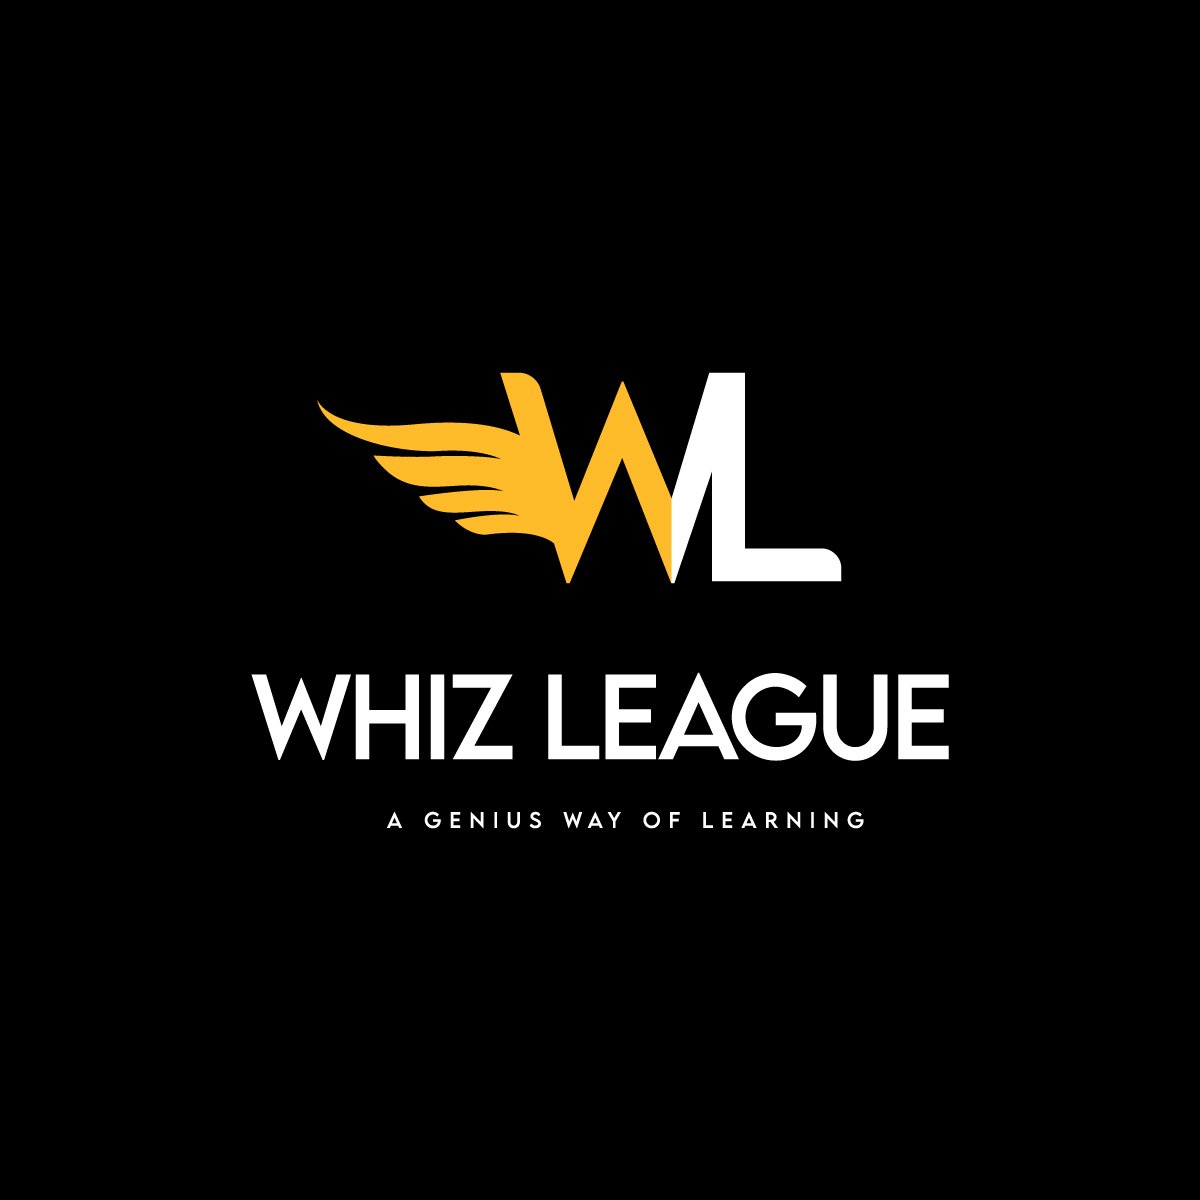 Whiz League to transform Growth for Retail and Hospitality